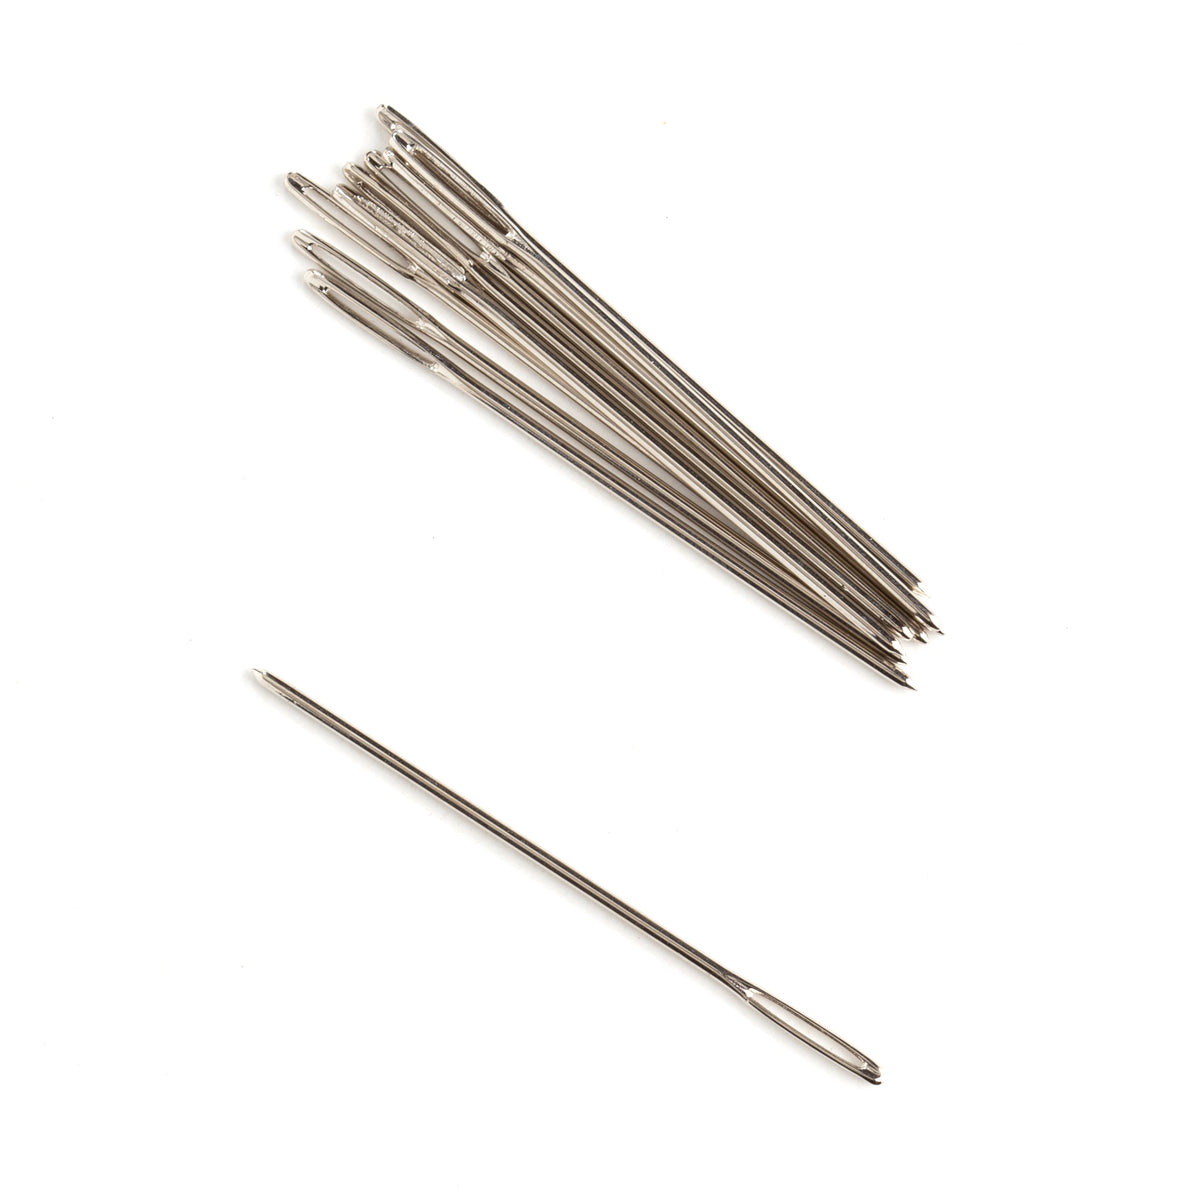 Weaving Needle set 2 Large & 2 Small needles With Free Shipping